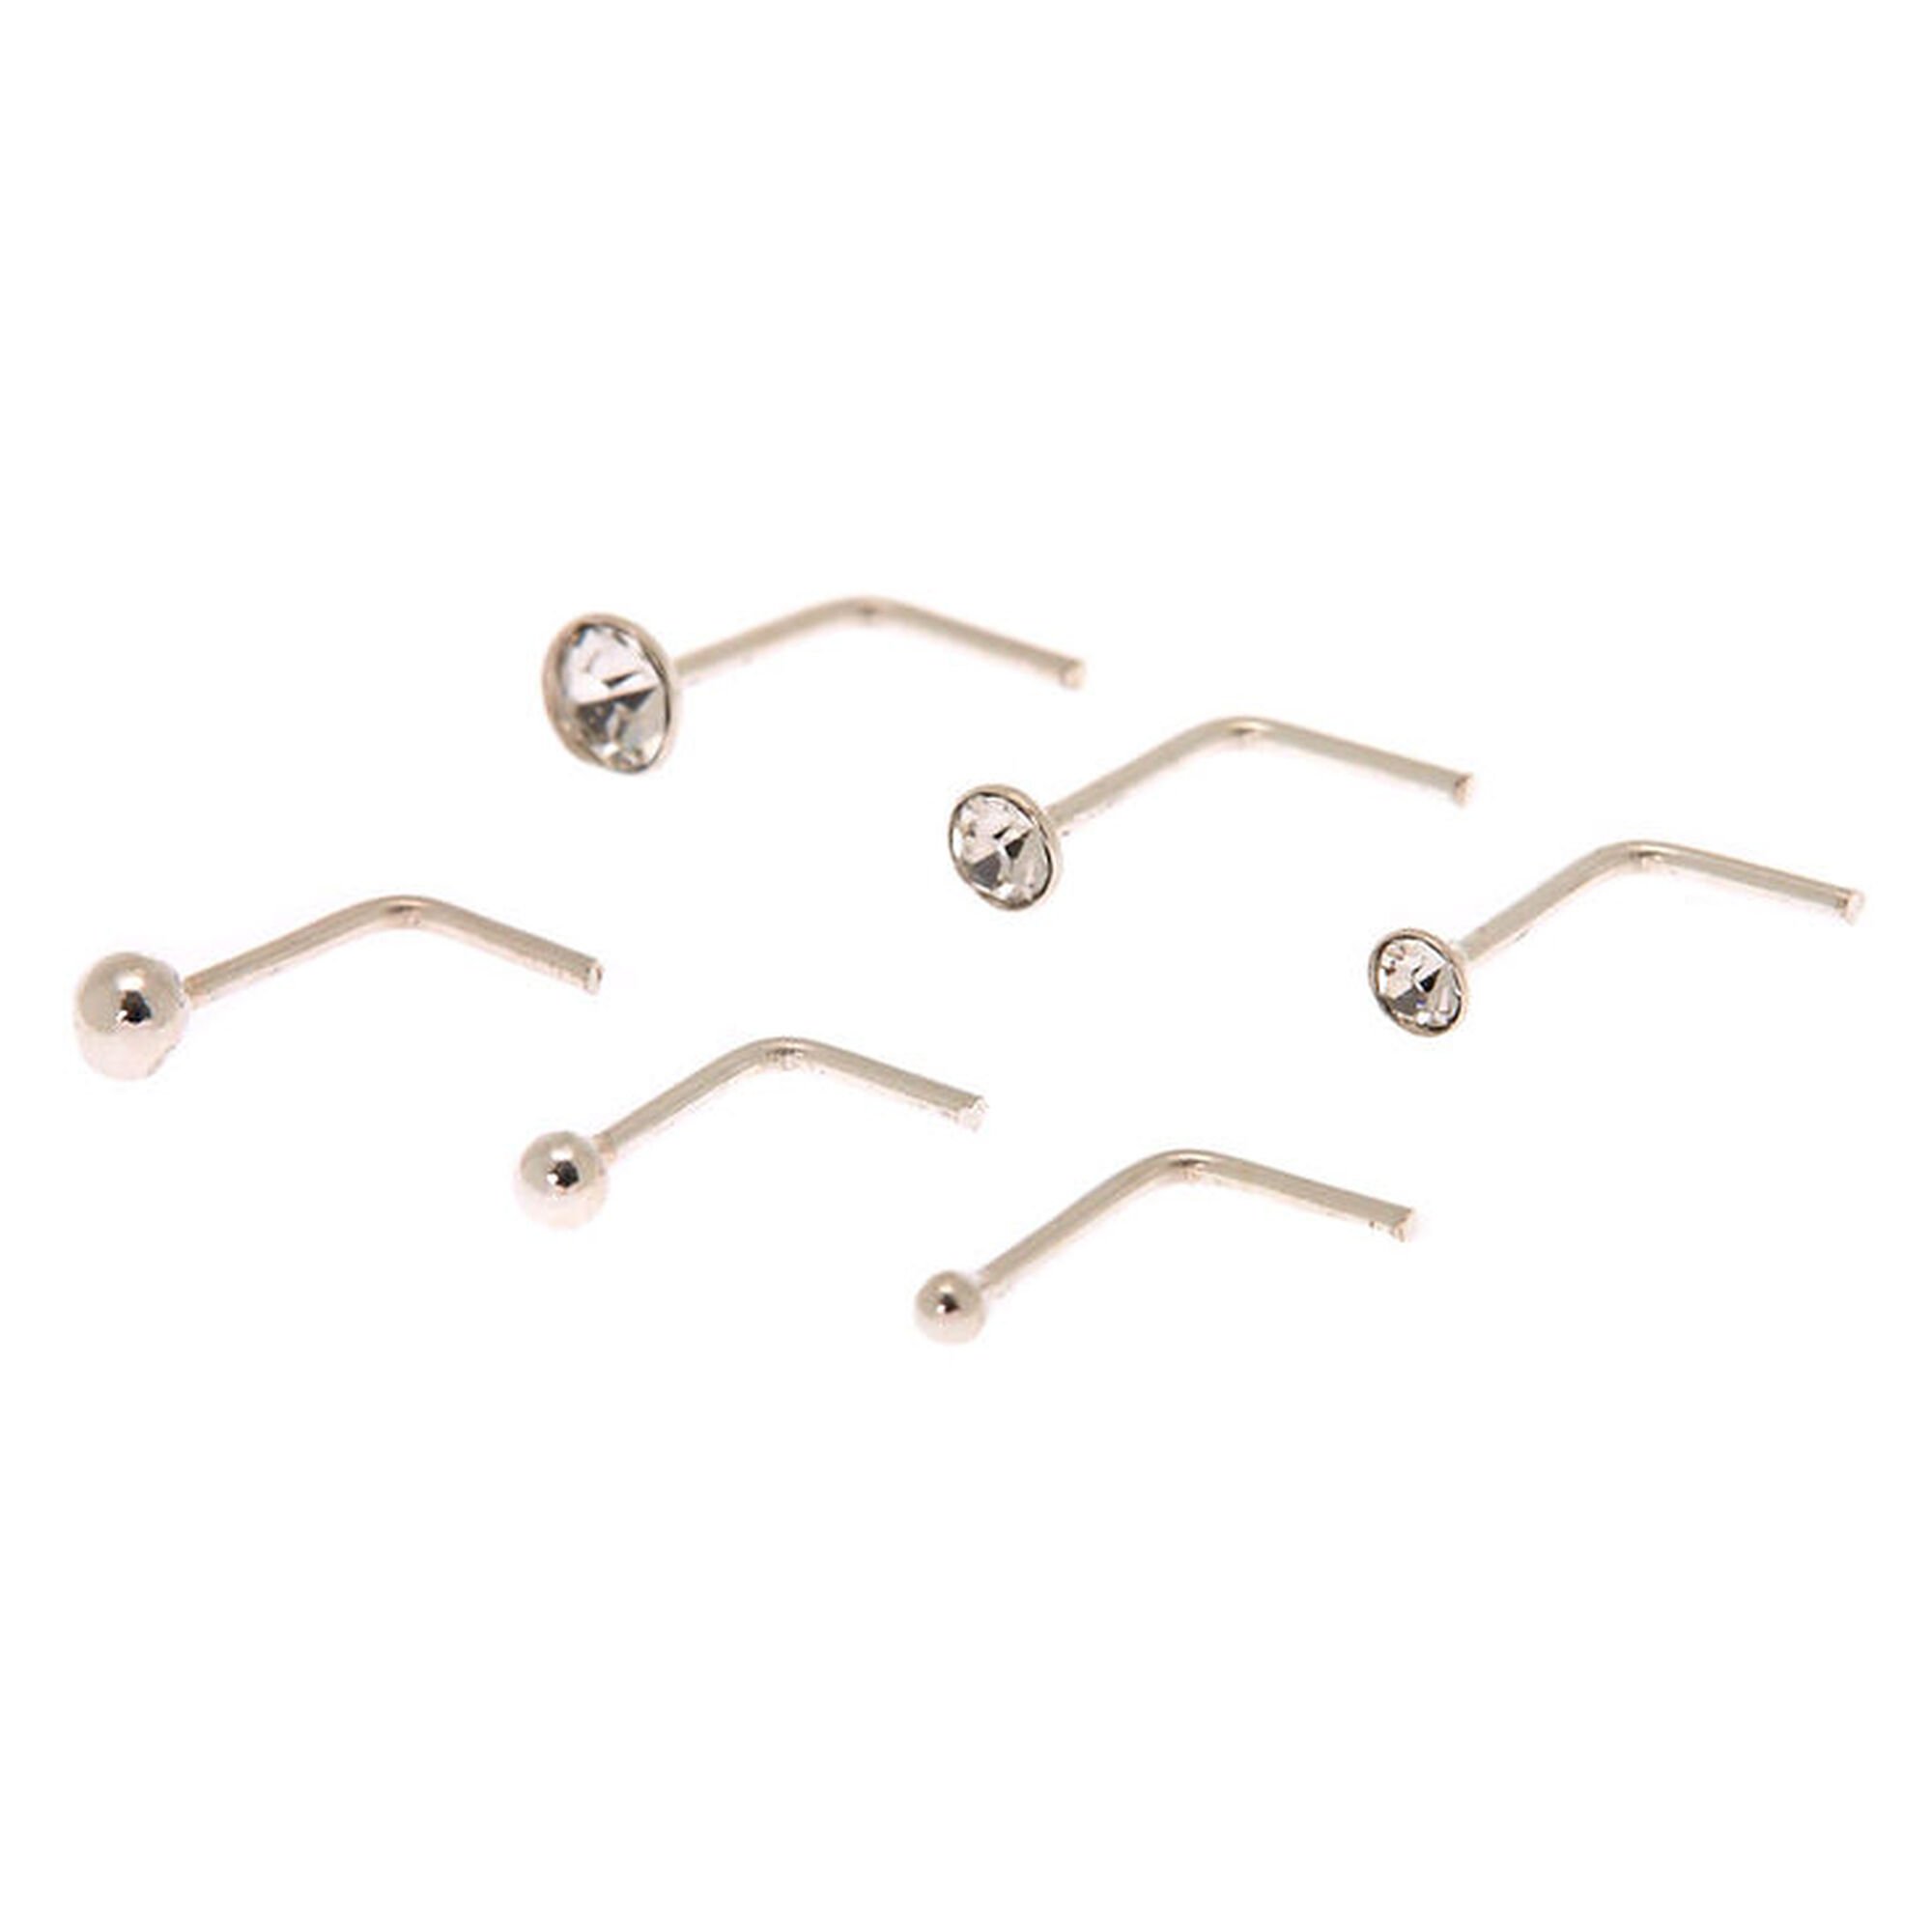 View Claires 22G Graduated Crystal Ball Nose Studs 6 Pack Silver information